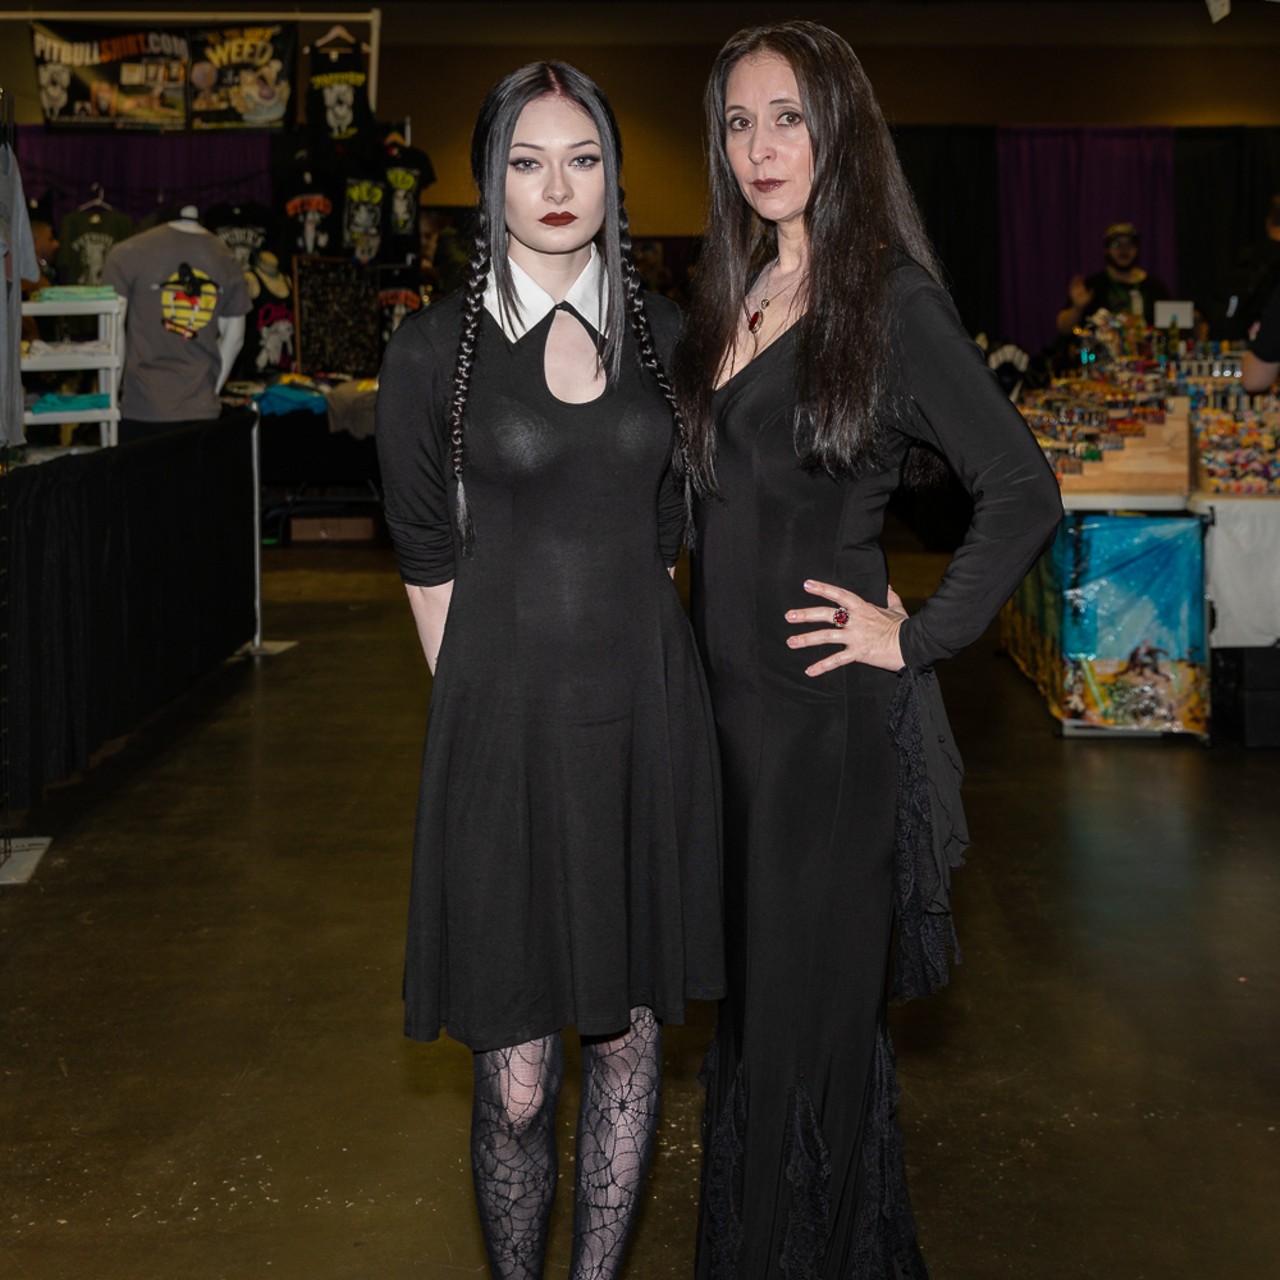 Everything we saw at Spooky Empire in Tampa